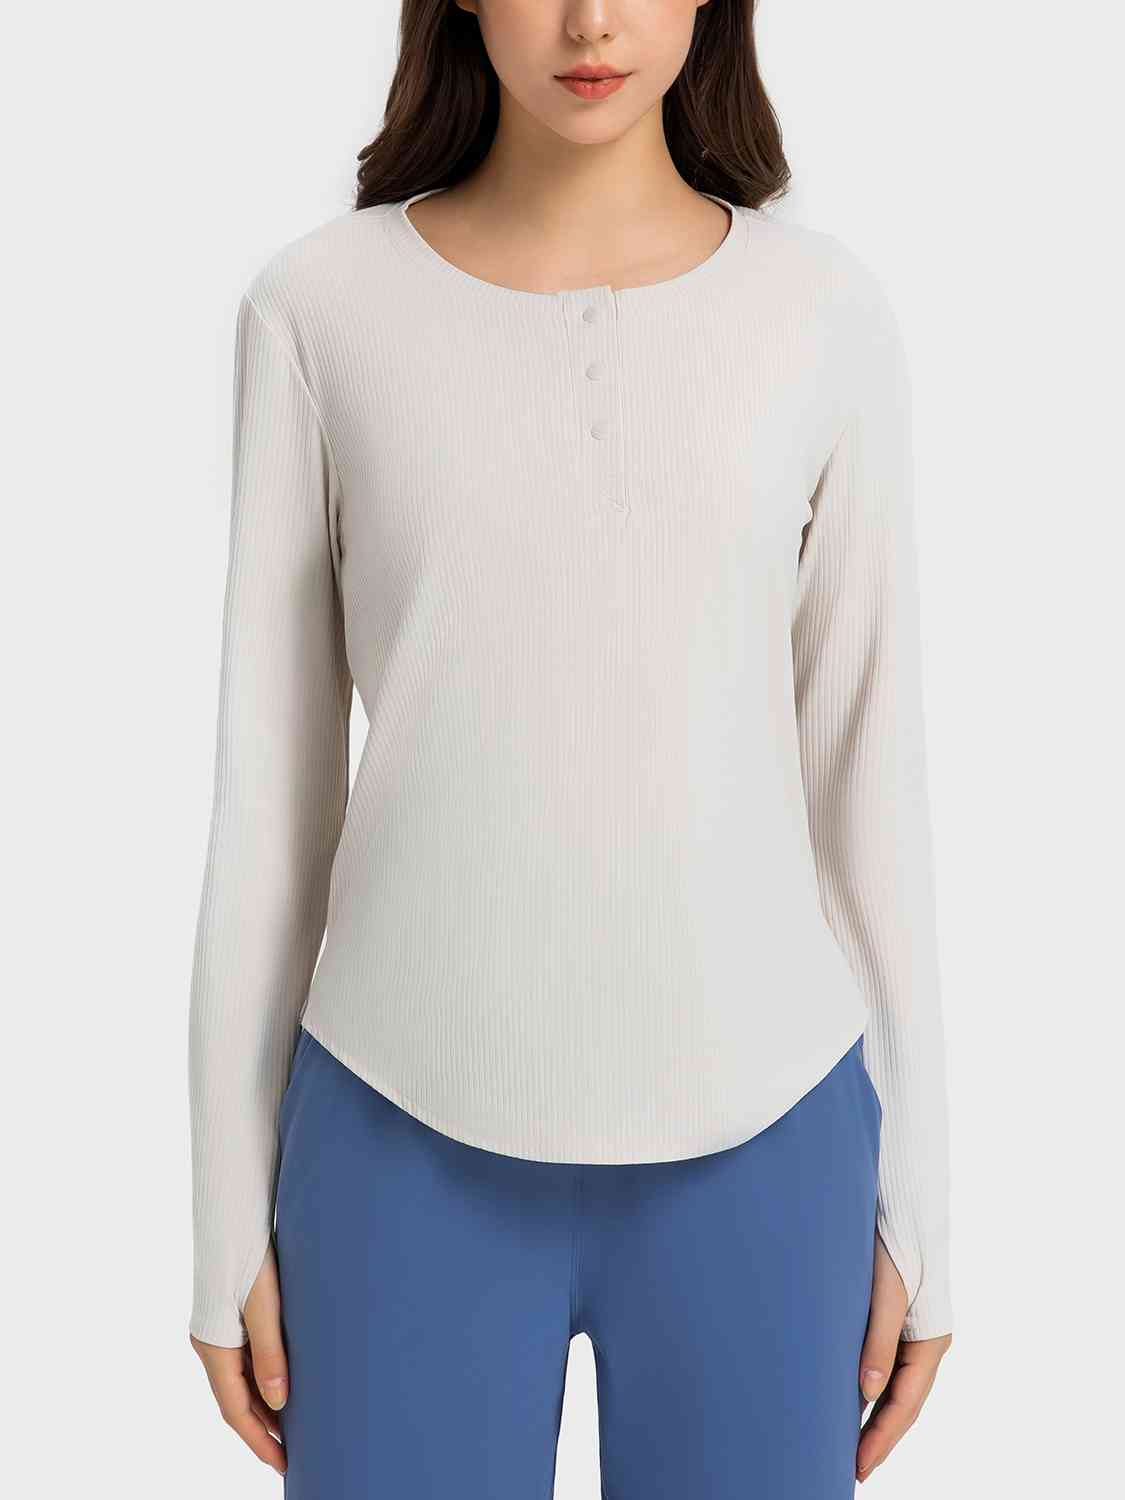 Round Neck Long Sleeve Sport Top White